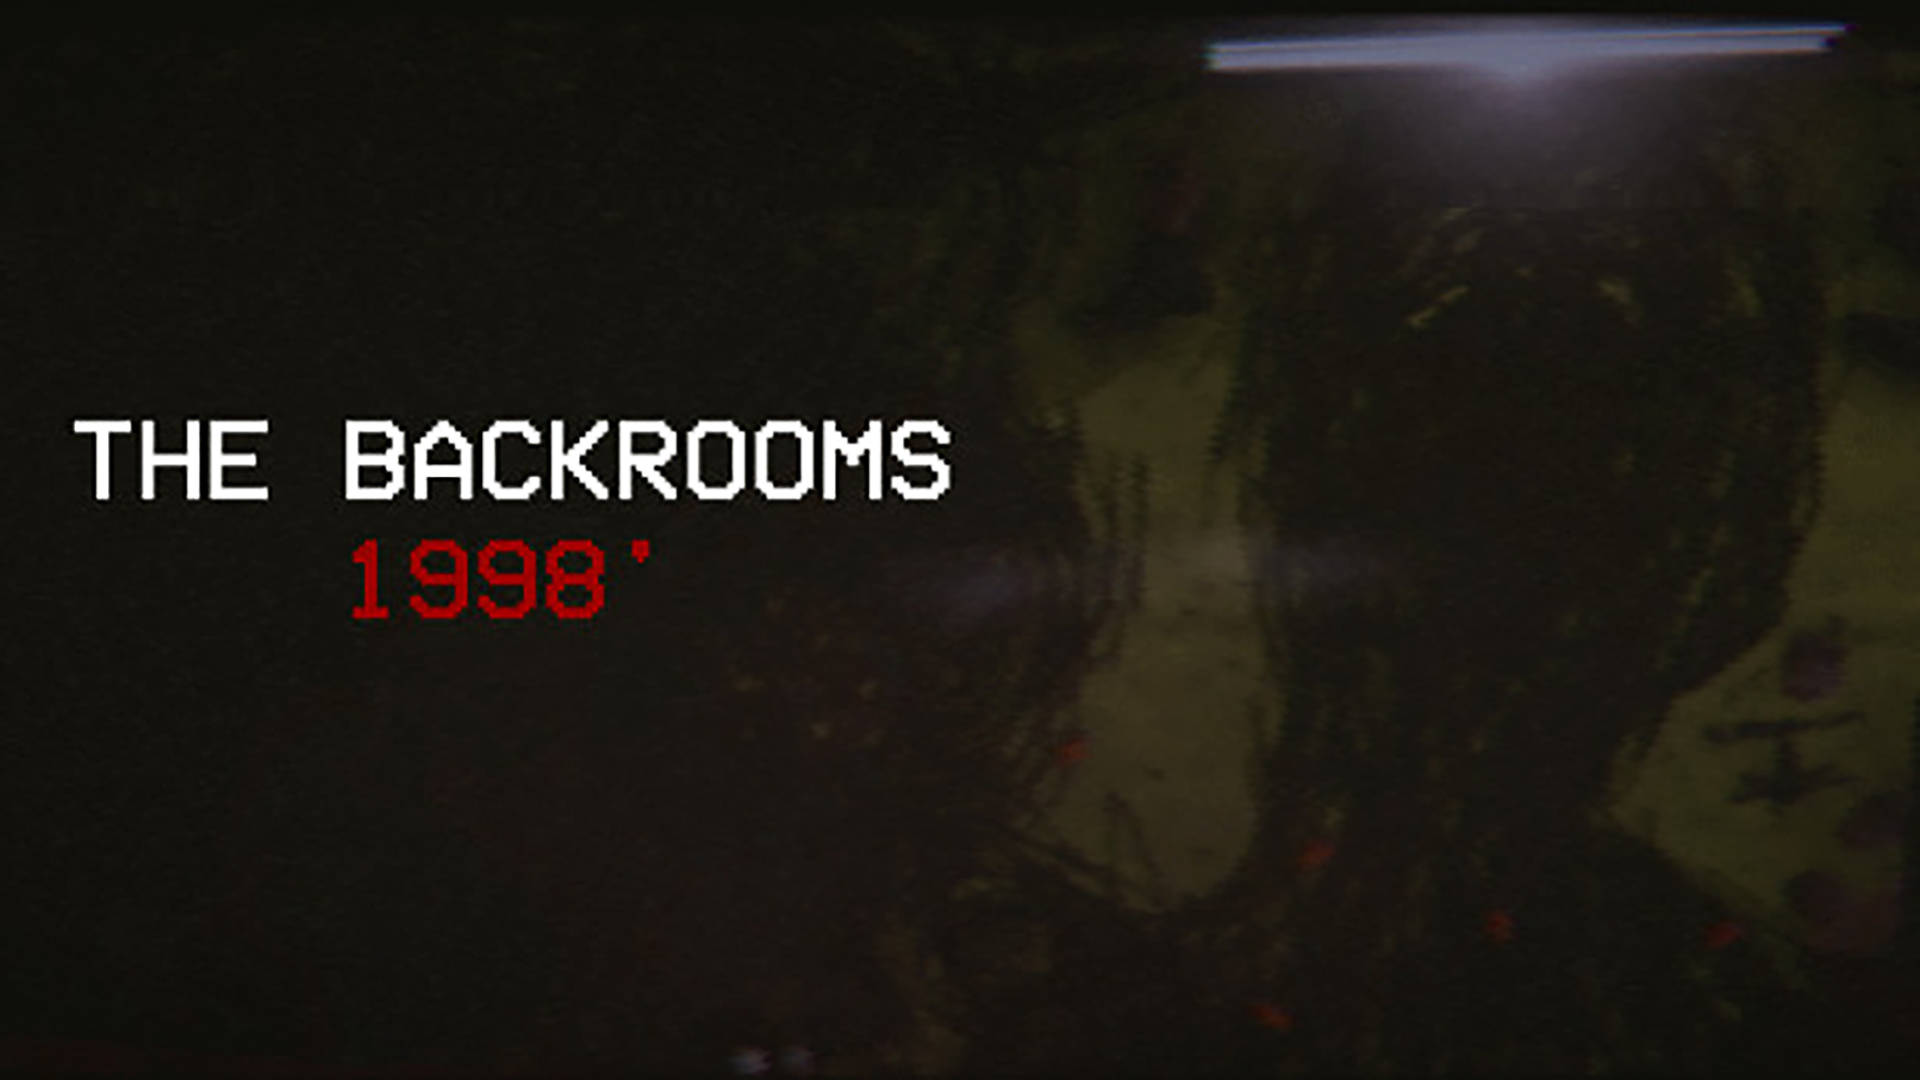 The Backrooms 1989 - A Dark Room With A Light On Wallpaper